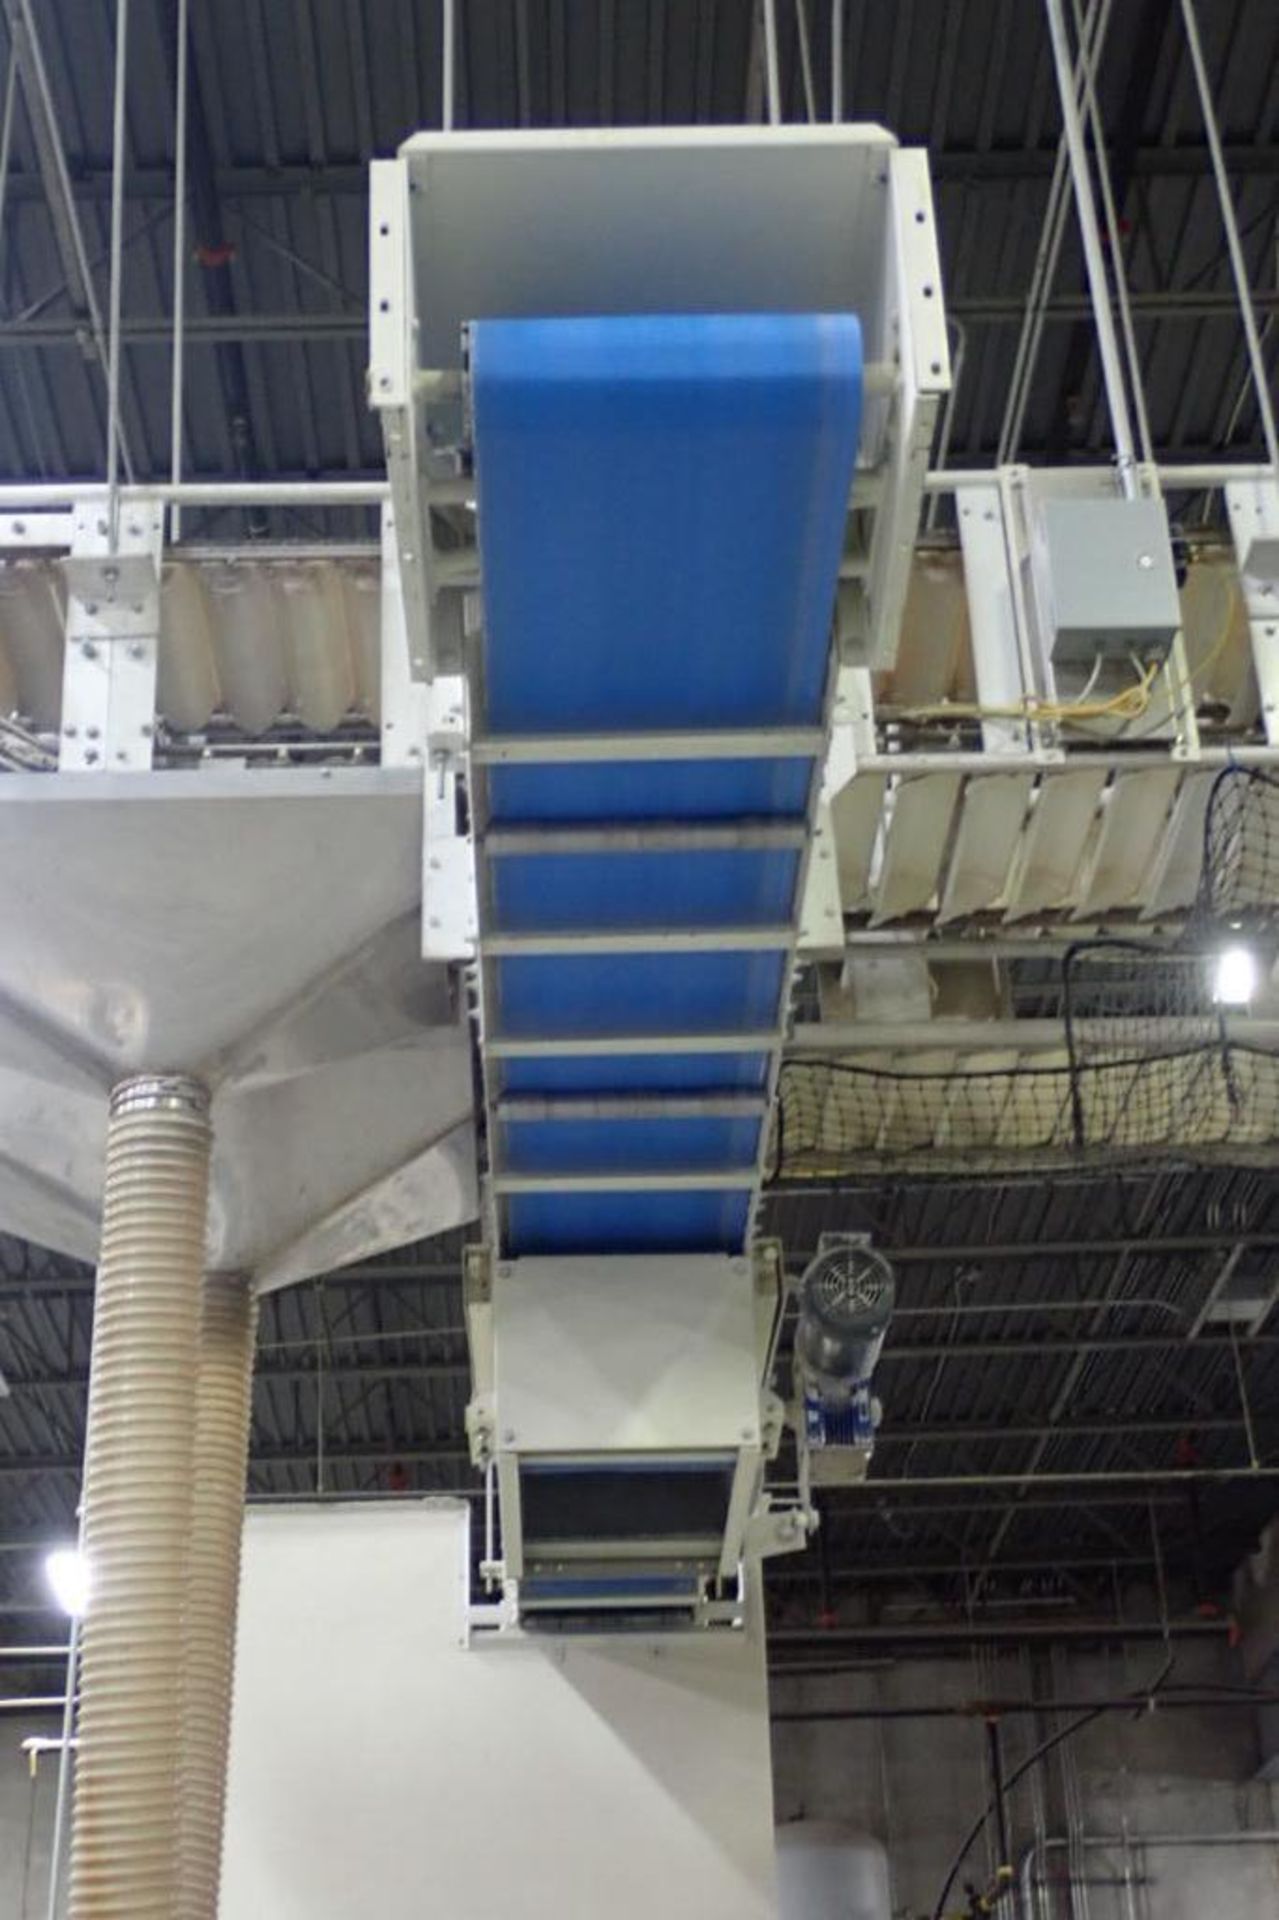 Rapat infeed conveyor, 20 ft. long x 24 in. wide, blue belt, motor and drive, suspended from ceiling - Bild 4 aus 4